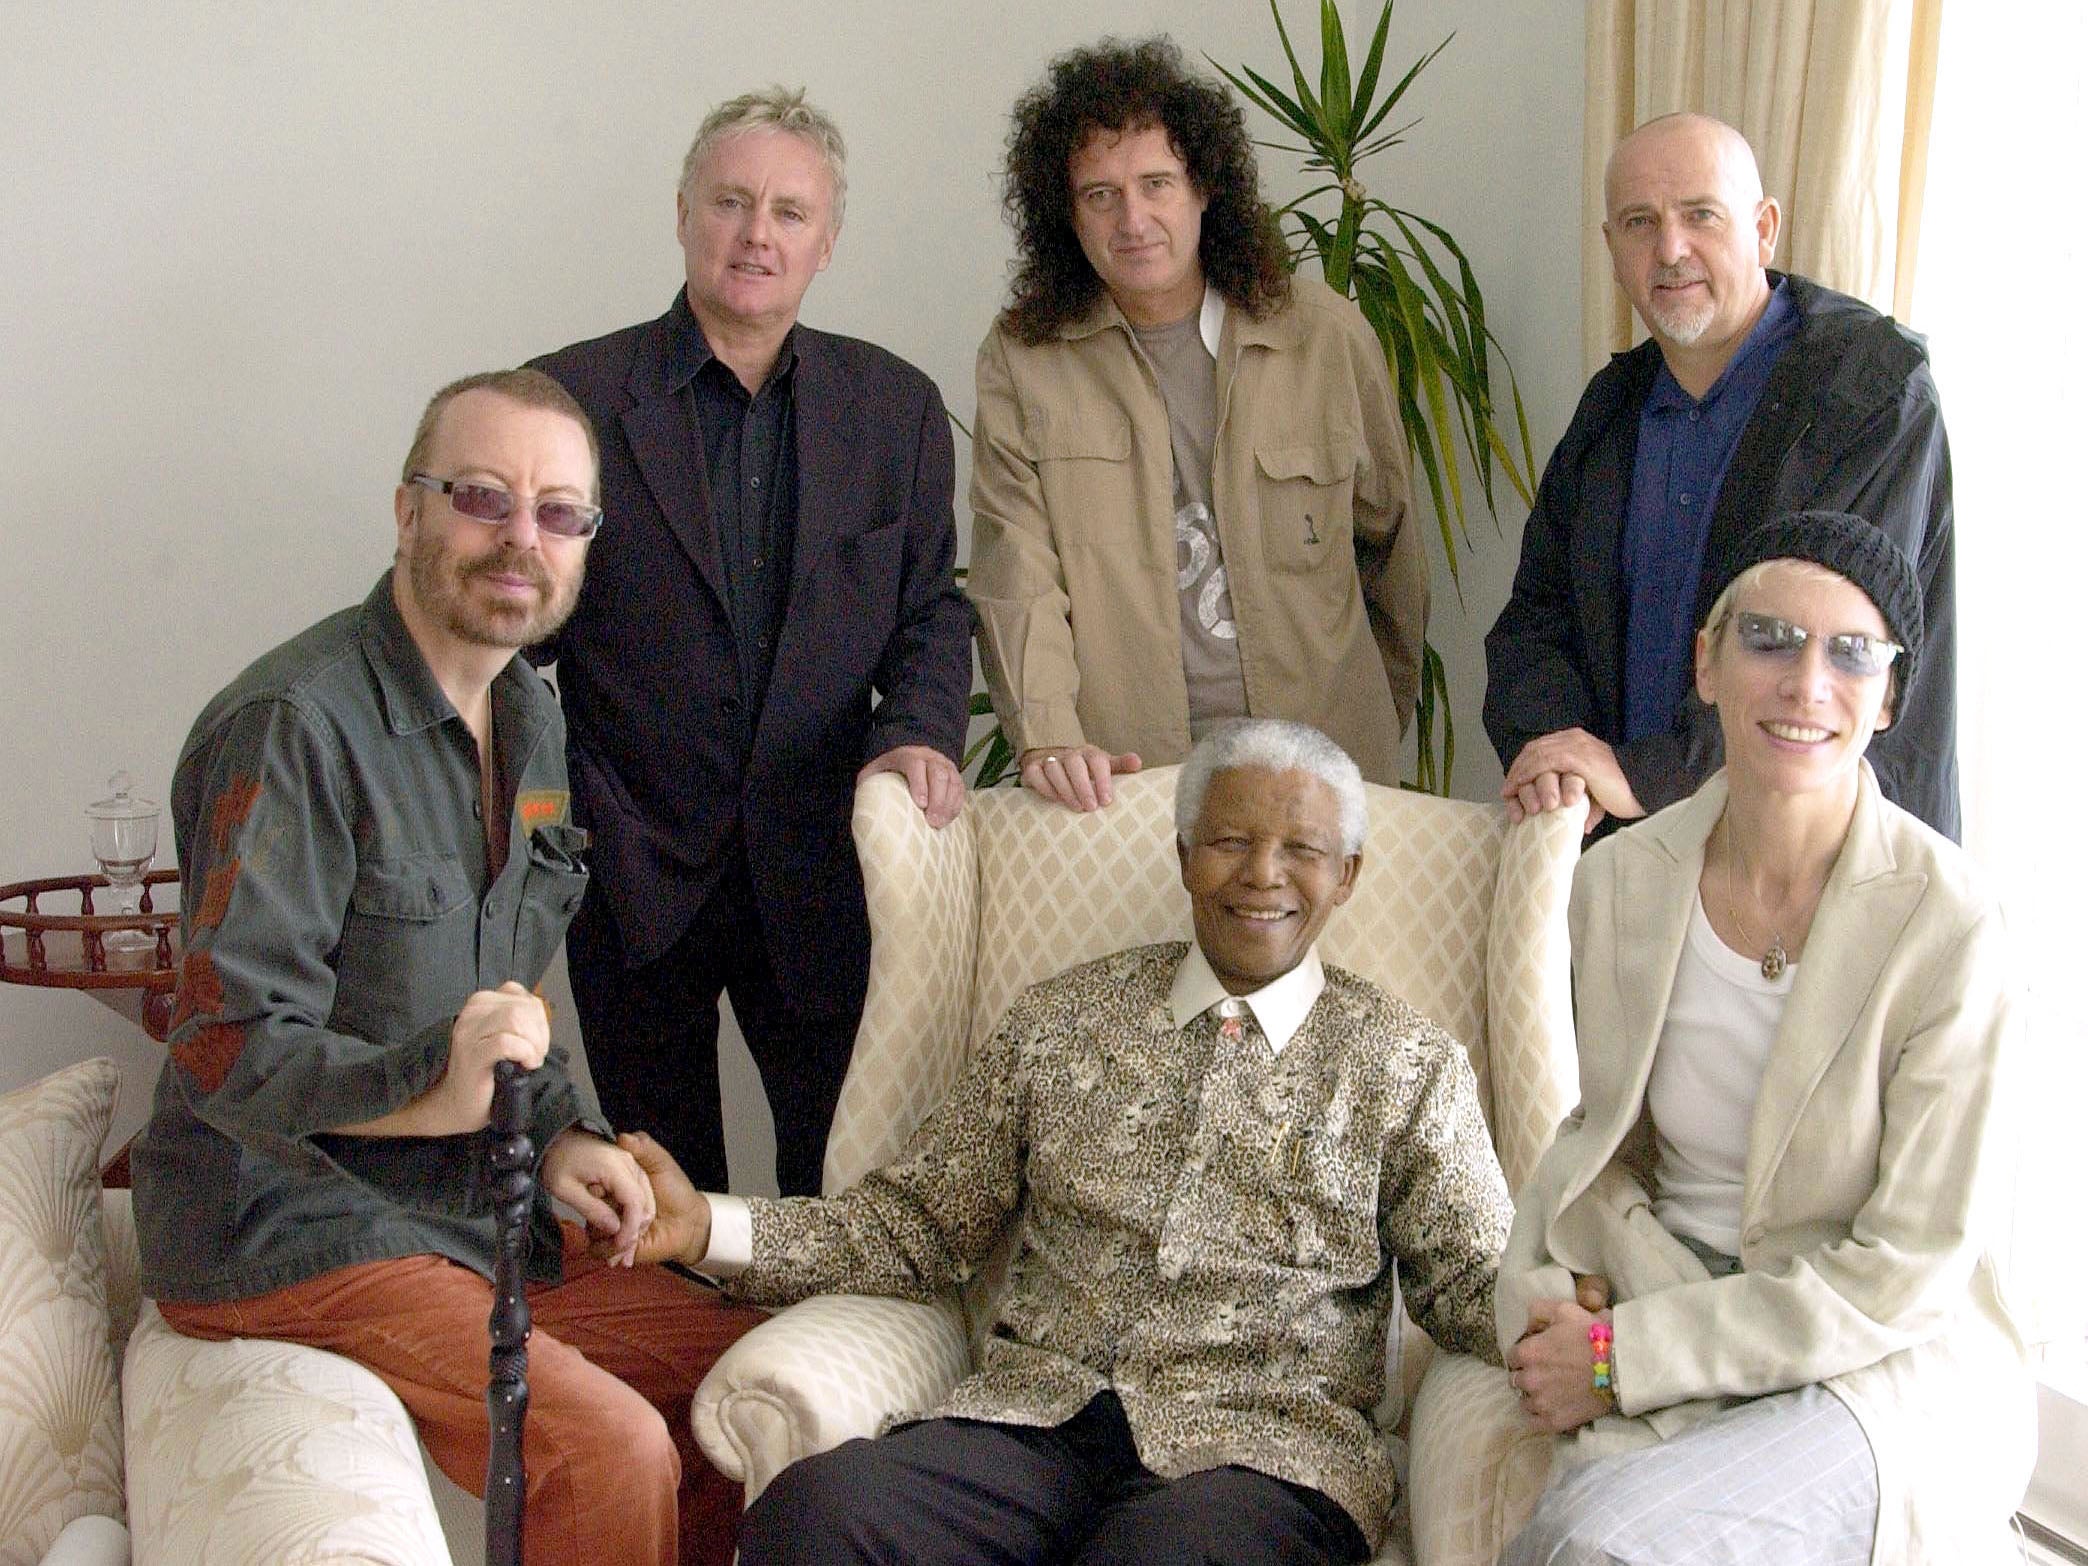 Lennox (right) meets Nelson Mandela with (from left) fellow Dave Stewart, Queen stars Roger Taylor and Brian May, and Peter Gabriel, before Mandela’s 46664 AIDS charity concert in Cape Town, South Africa, in 2003